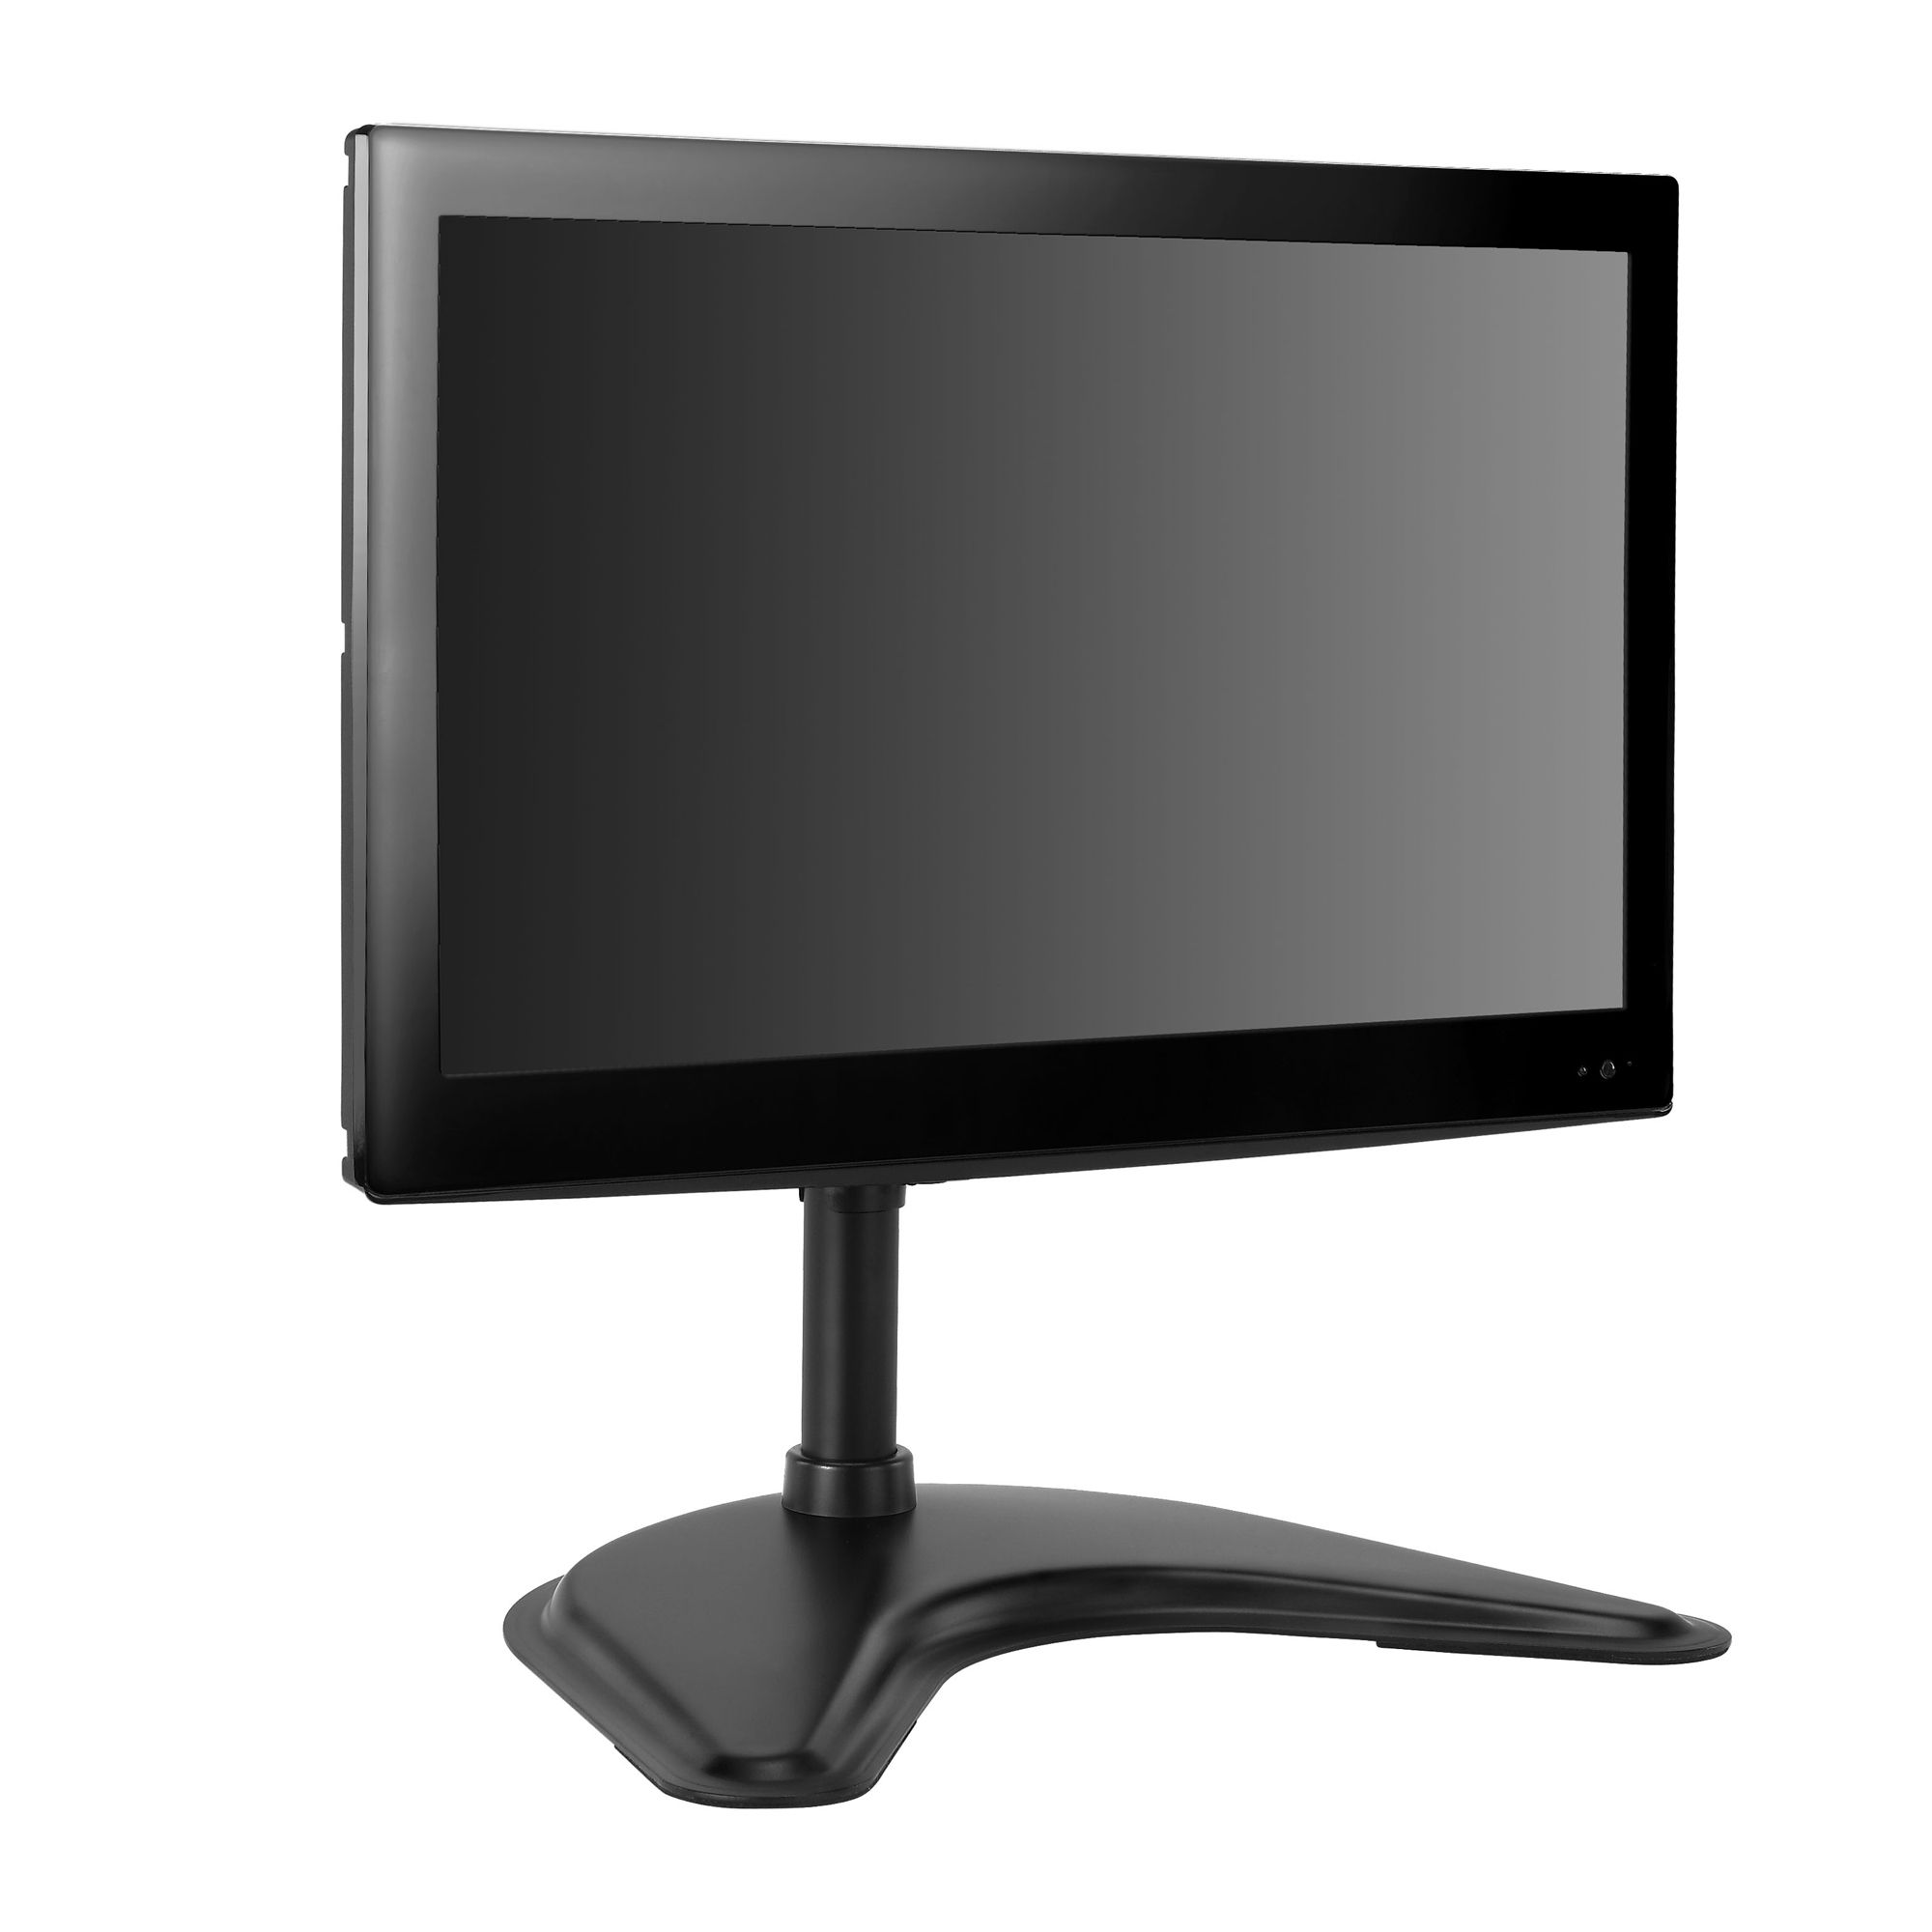 Vonhaus Single Monitor Mount Desk Stand For 13 27" Screen With Regard To Single Tv Stands (View 15 of 15)